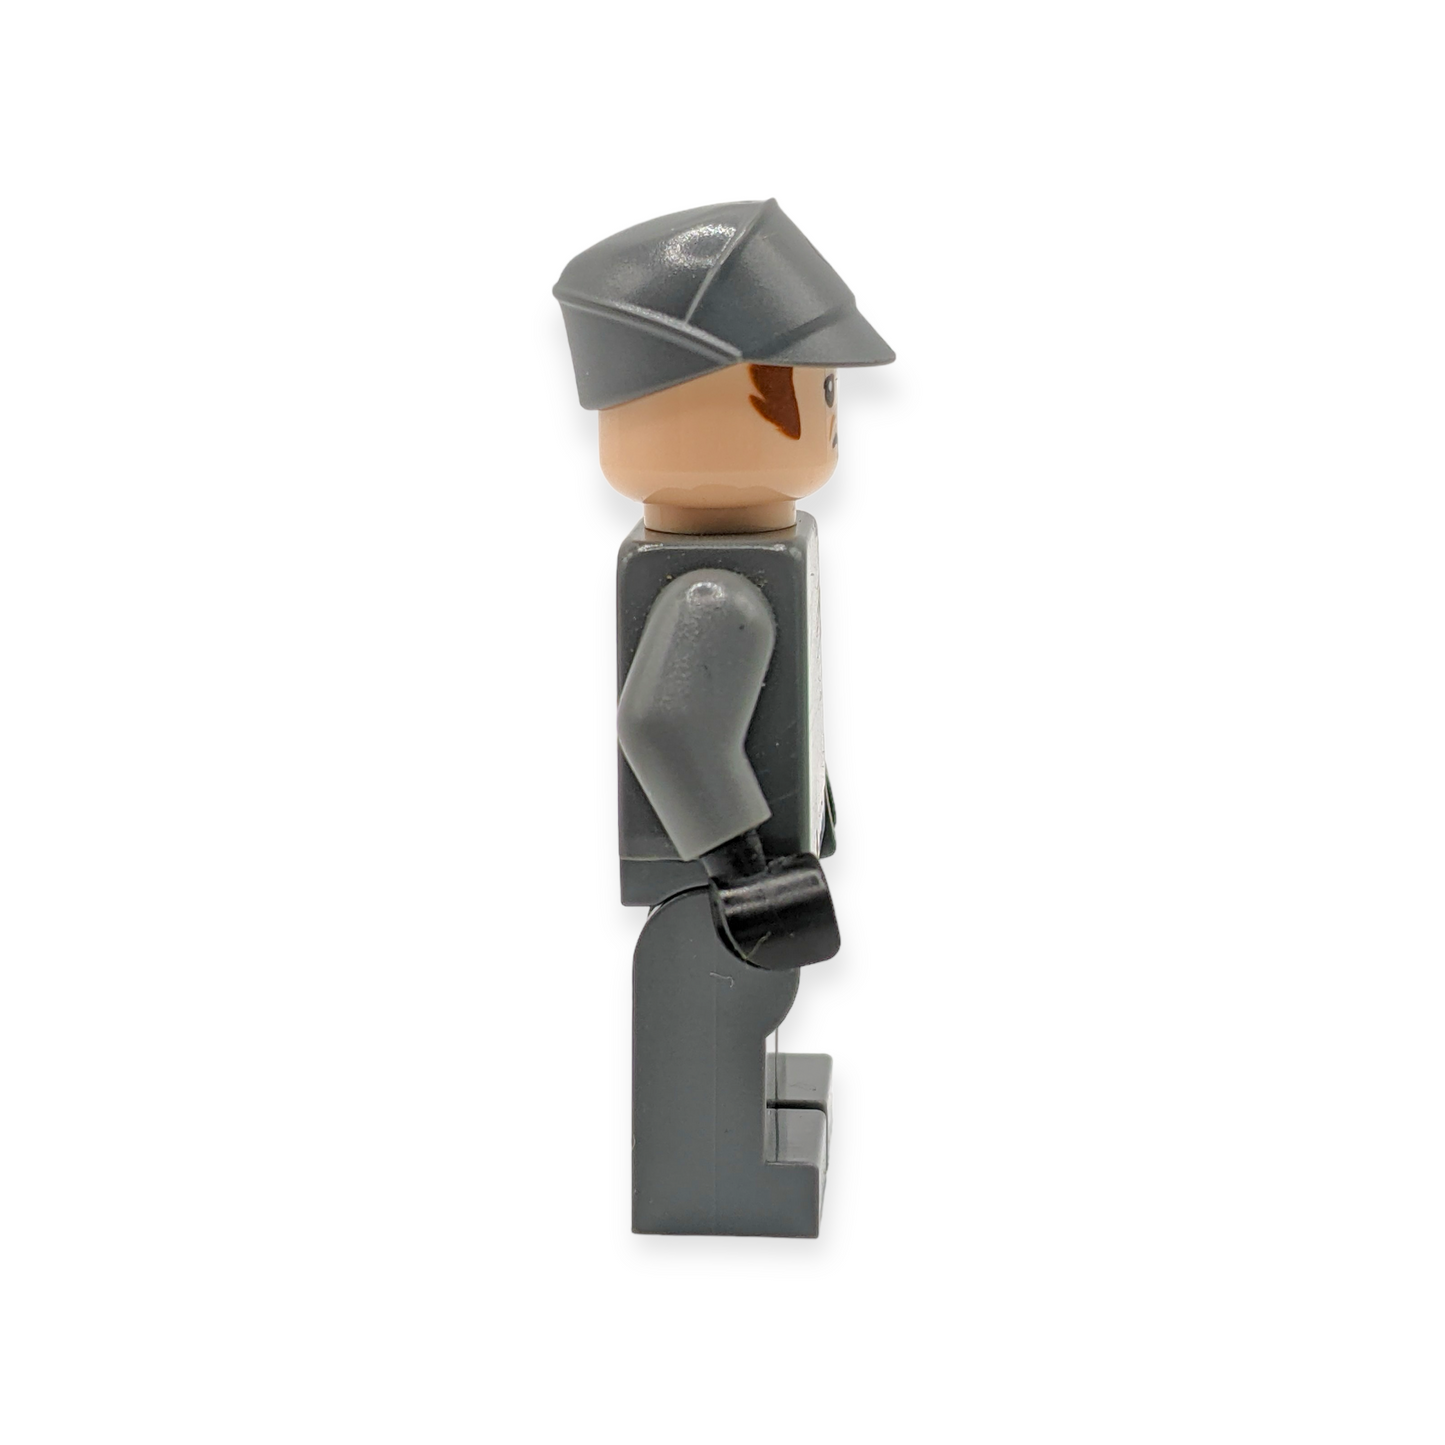 LEGO Star Wars Imperial Officer (Major / Colonel / Commodore)